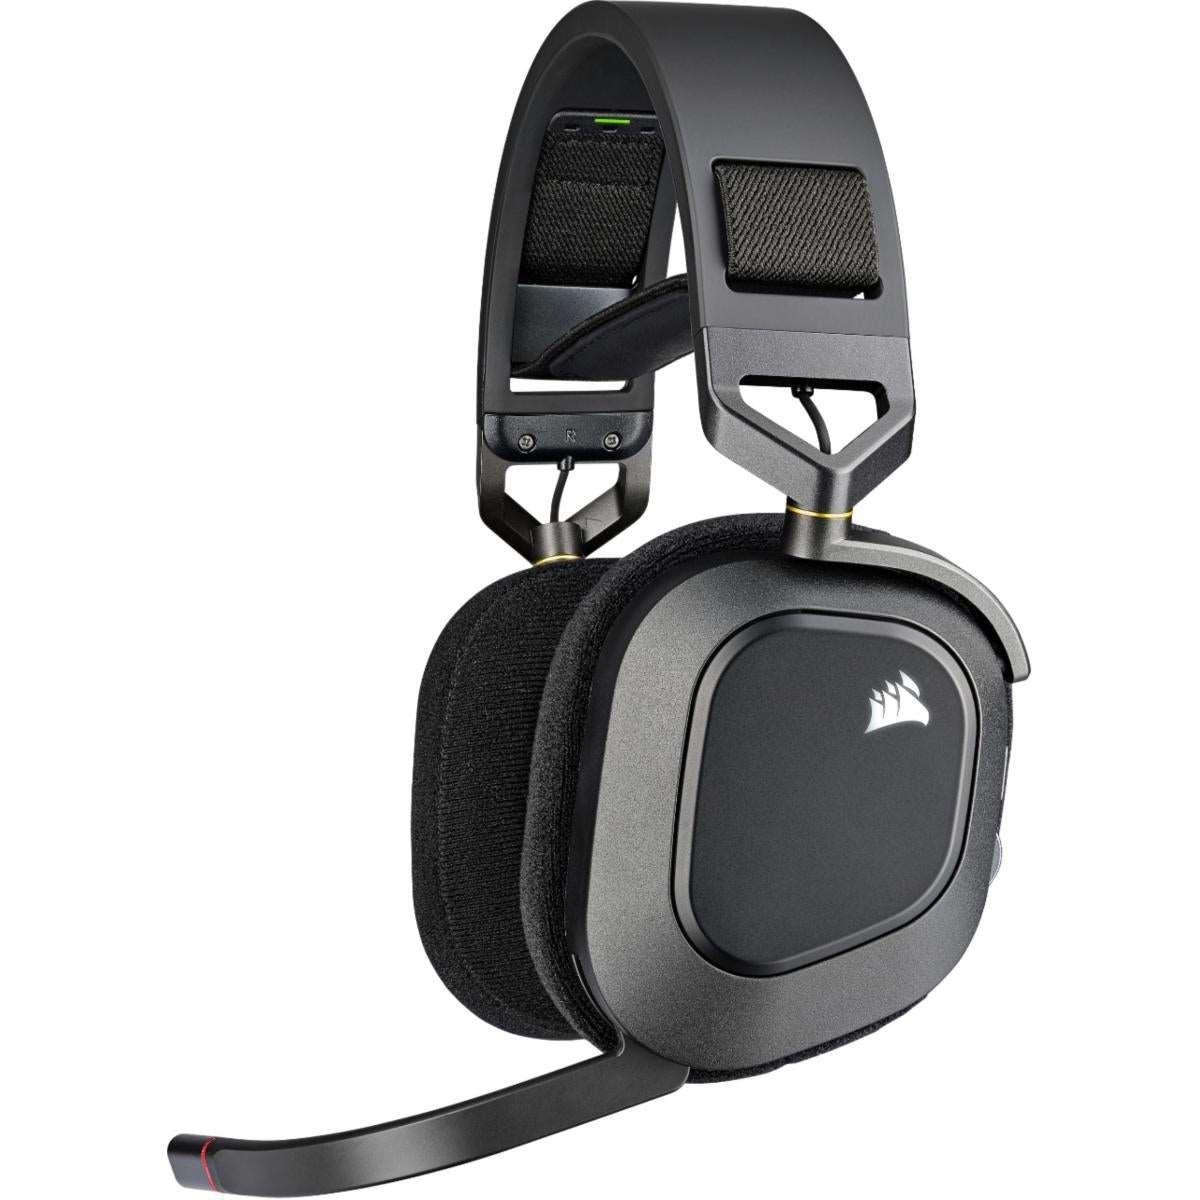 CORSAIR GAMING HEADSET Corsair HS80 RGB WIRELESS Premium Dolby Atmos 7.1 Surround Gaming Headset w/ Memory Foam & Noise Cancelling Mic-Carbon